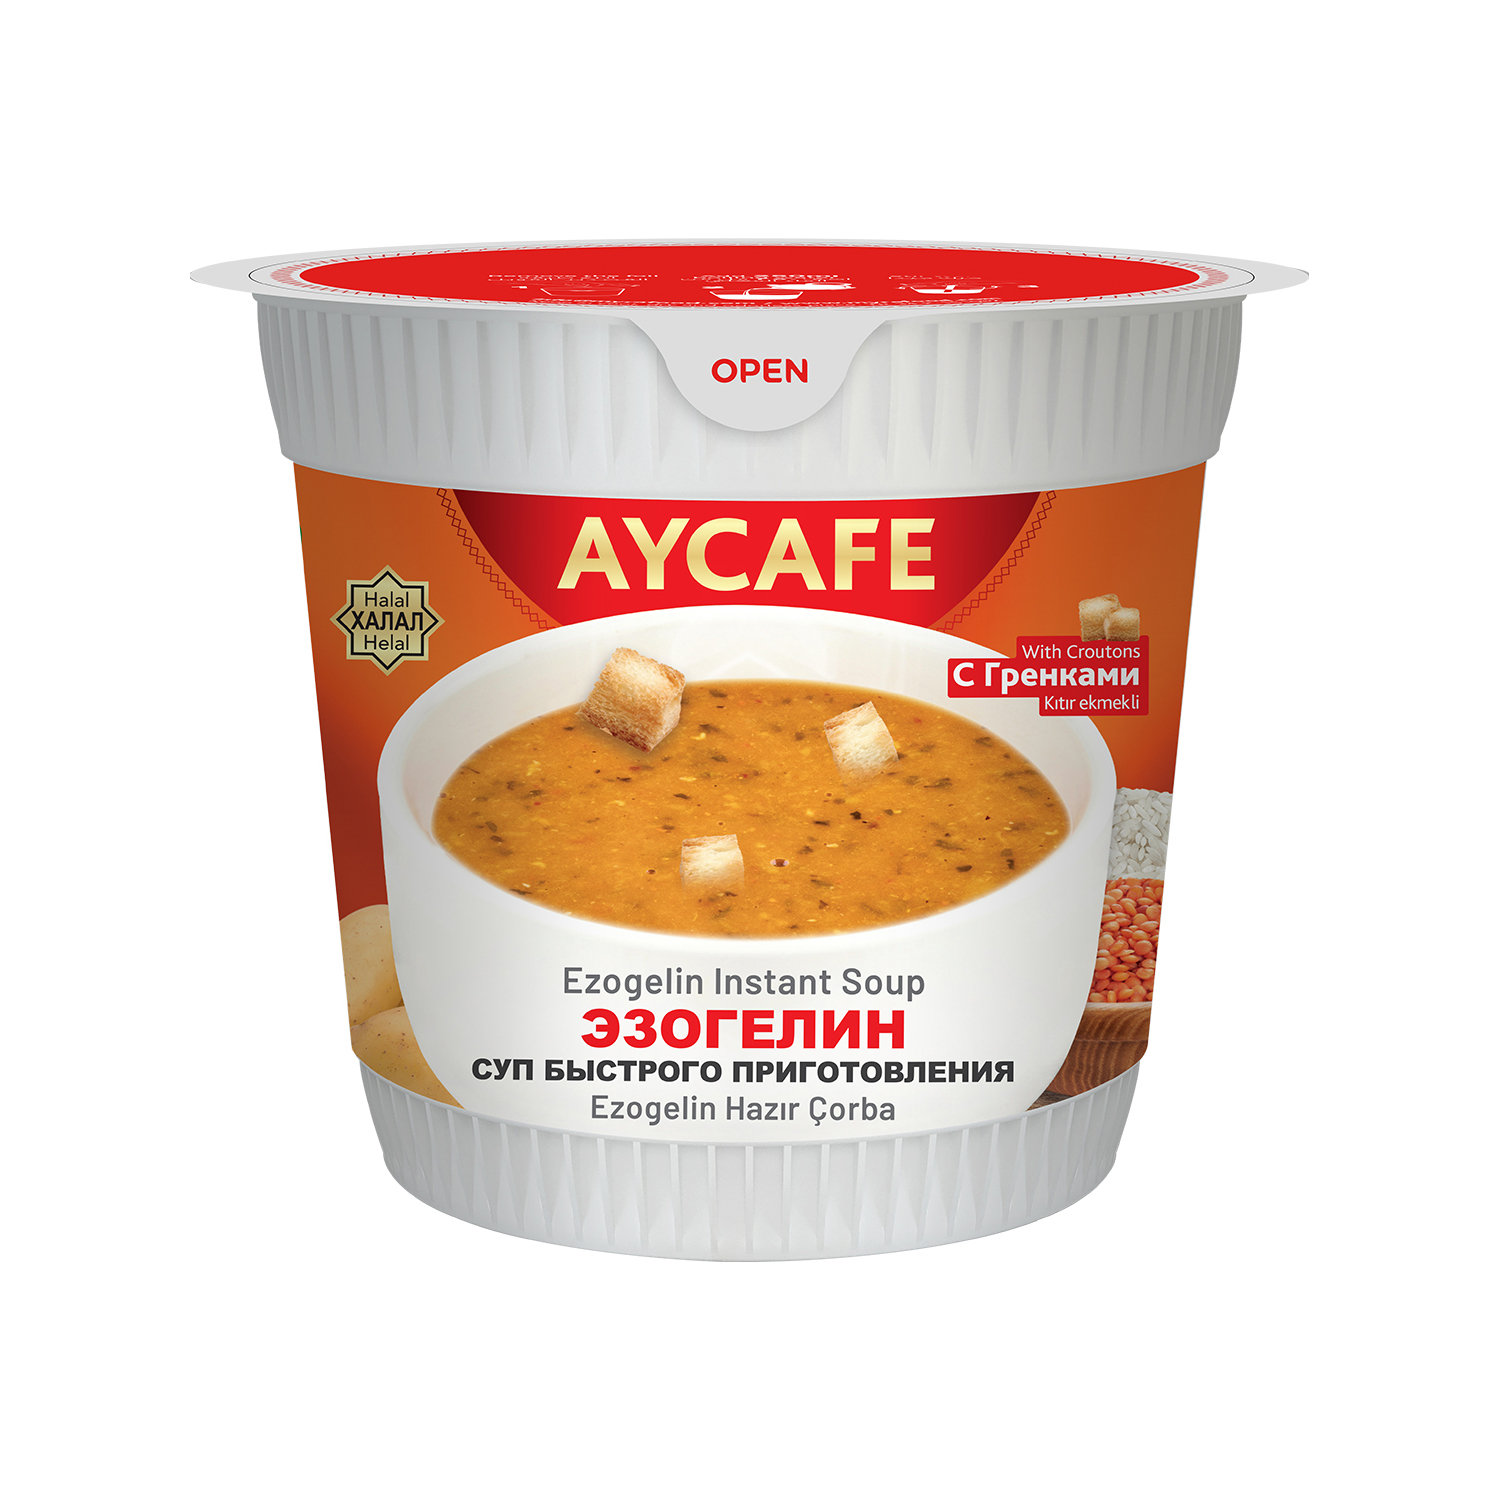 Aycafe Ezogelin Instant Soup In Cup